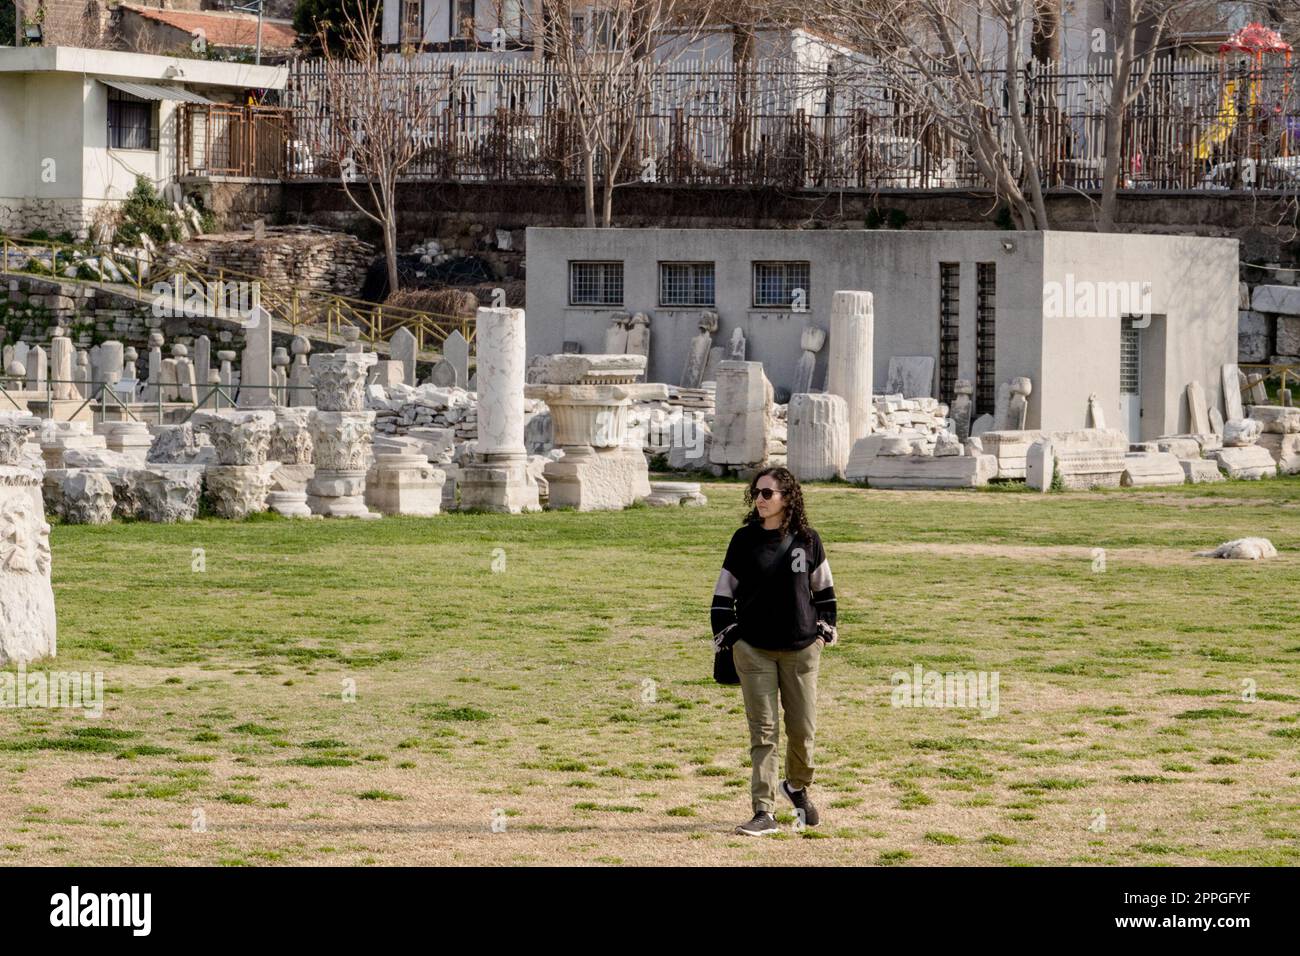 A tourist visits the Agora Ören Yeri in Izmir, Turkey, a magnificent ancient site that showcases the remnants of a once-great marketplace and cultural hub. Stock Photo